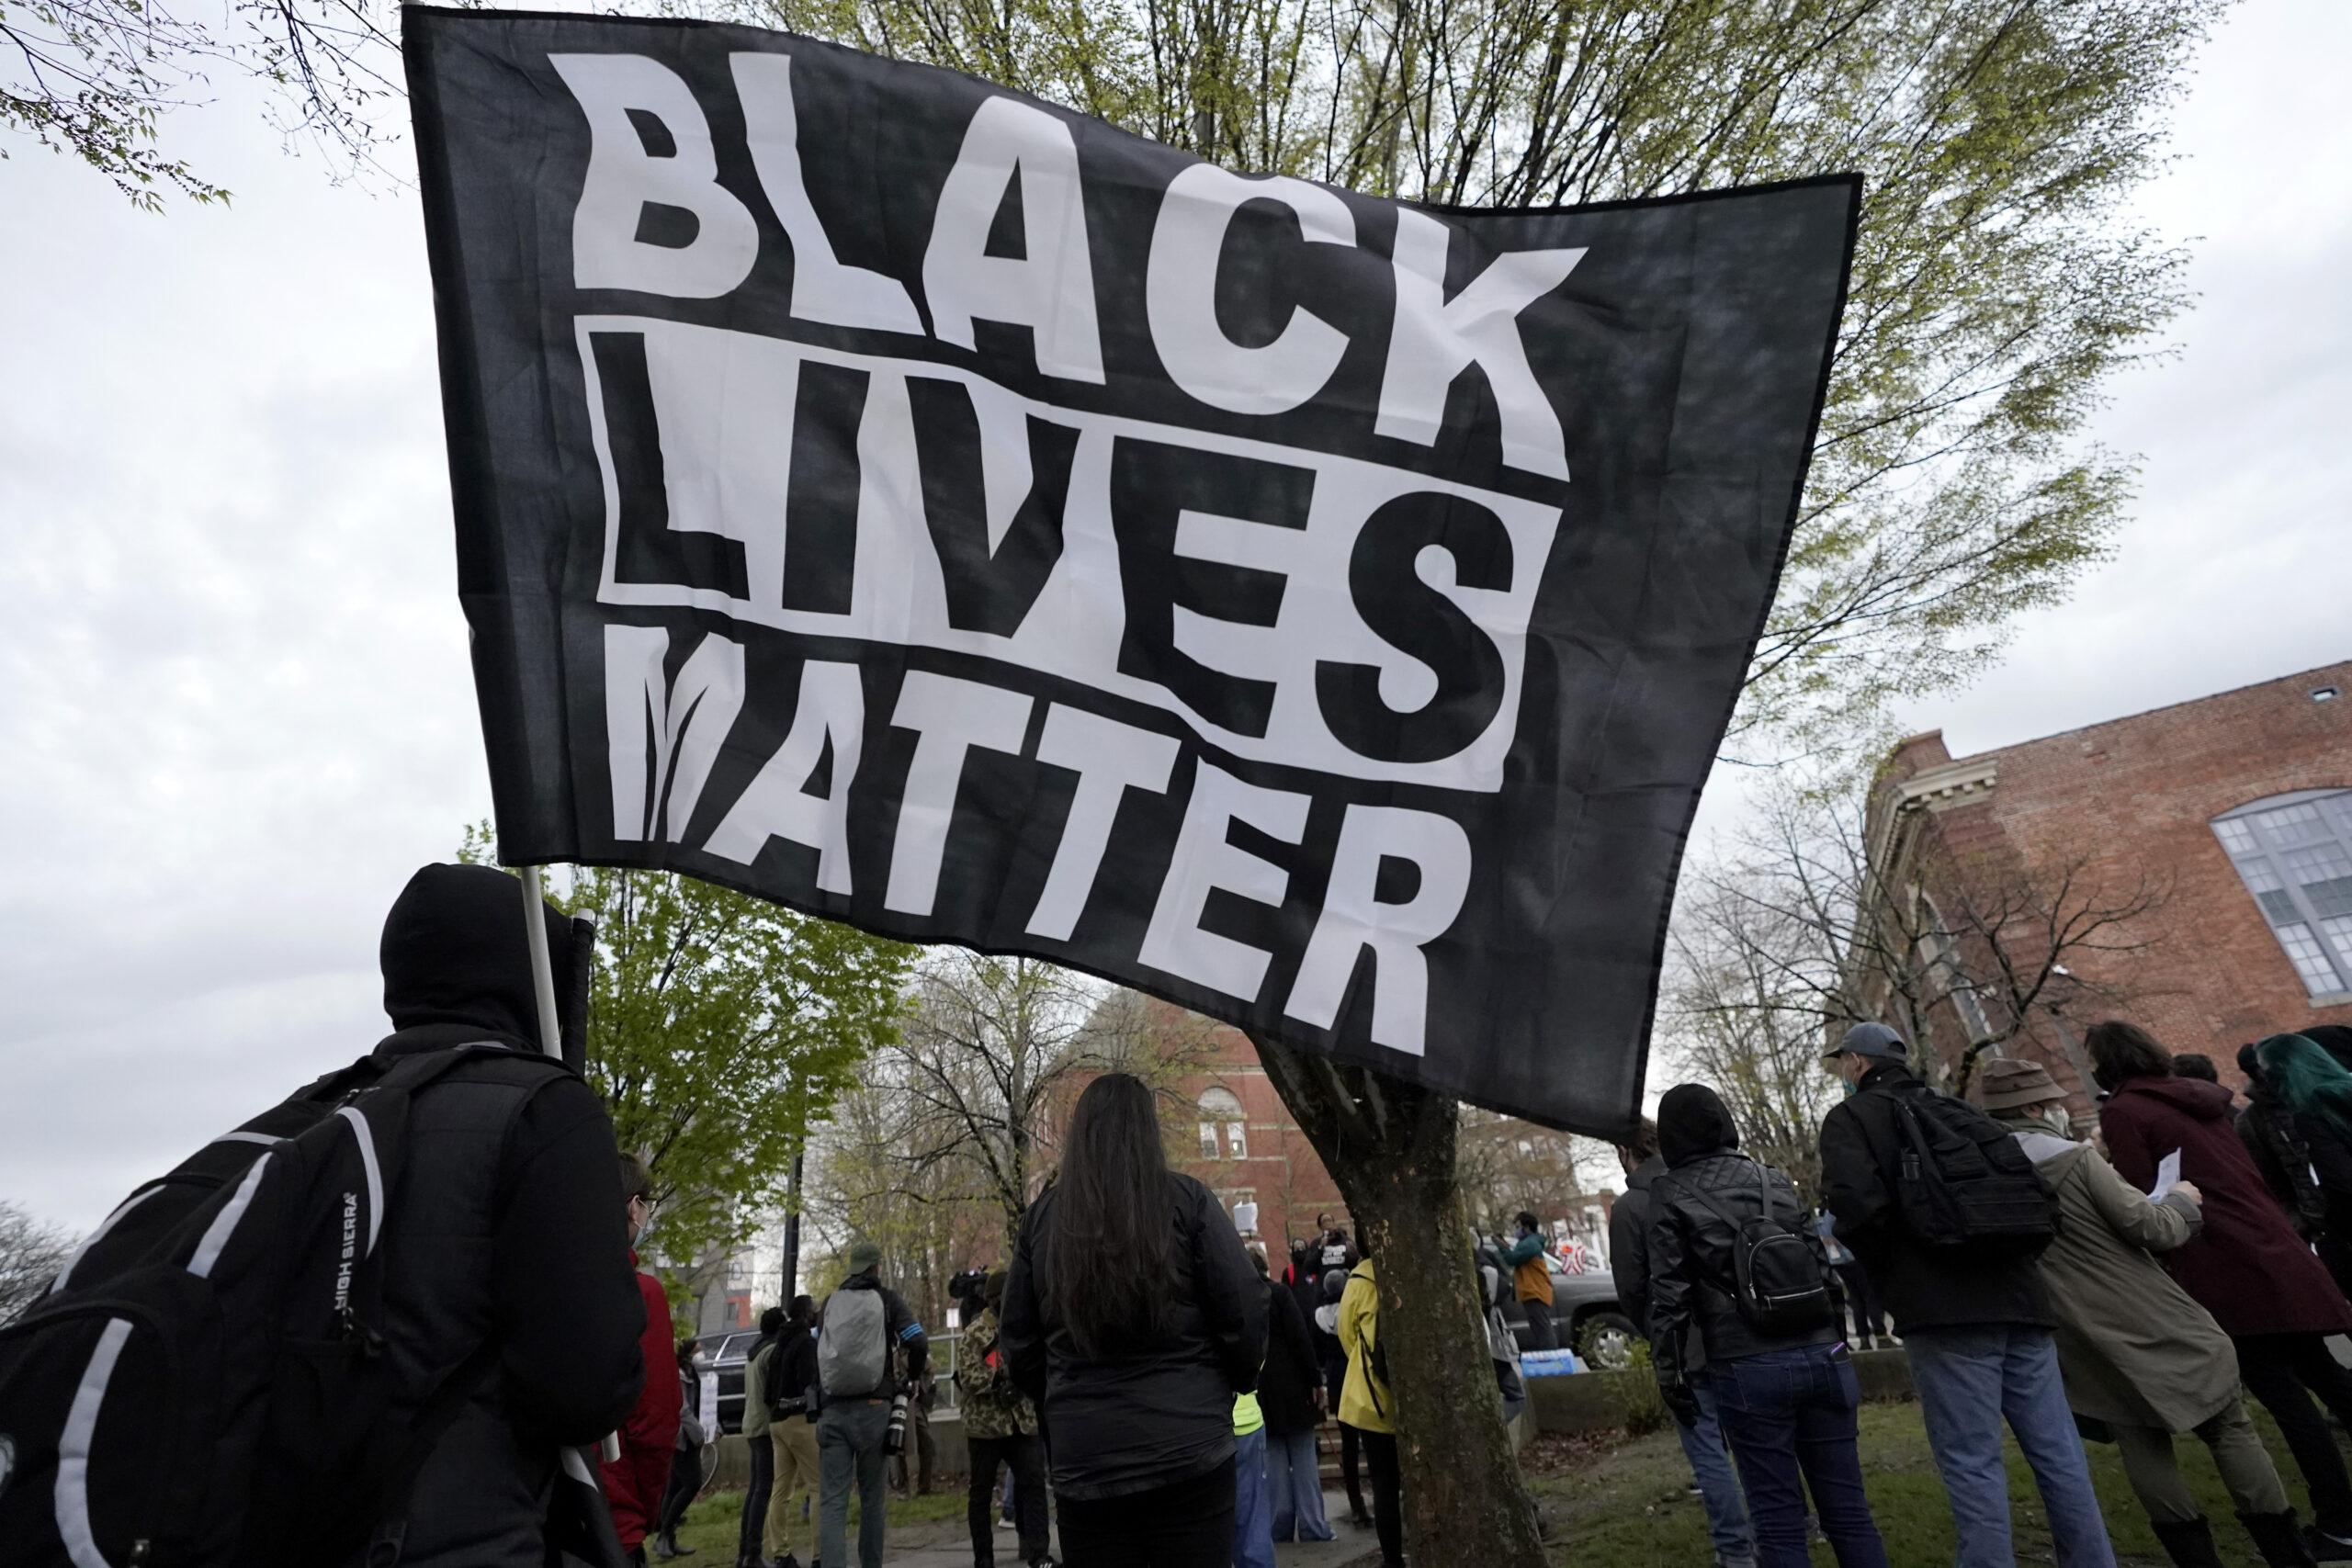 A demonstrator display a banner during a protest, Wednesday, April 21, 2021, in the Nubian Square neighborhood of Boston, a day after a guilty verdict was announced at the trial of former Minneapolis Police Officer Derek Chauvin for the 2020 death of George Floyd. Chauvin was convicted of murder and manslaughter Floyd's death. The demonstrators called for police reform and racial equality. Photo credit: Steven Senne